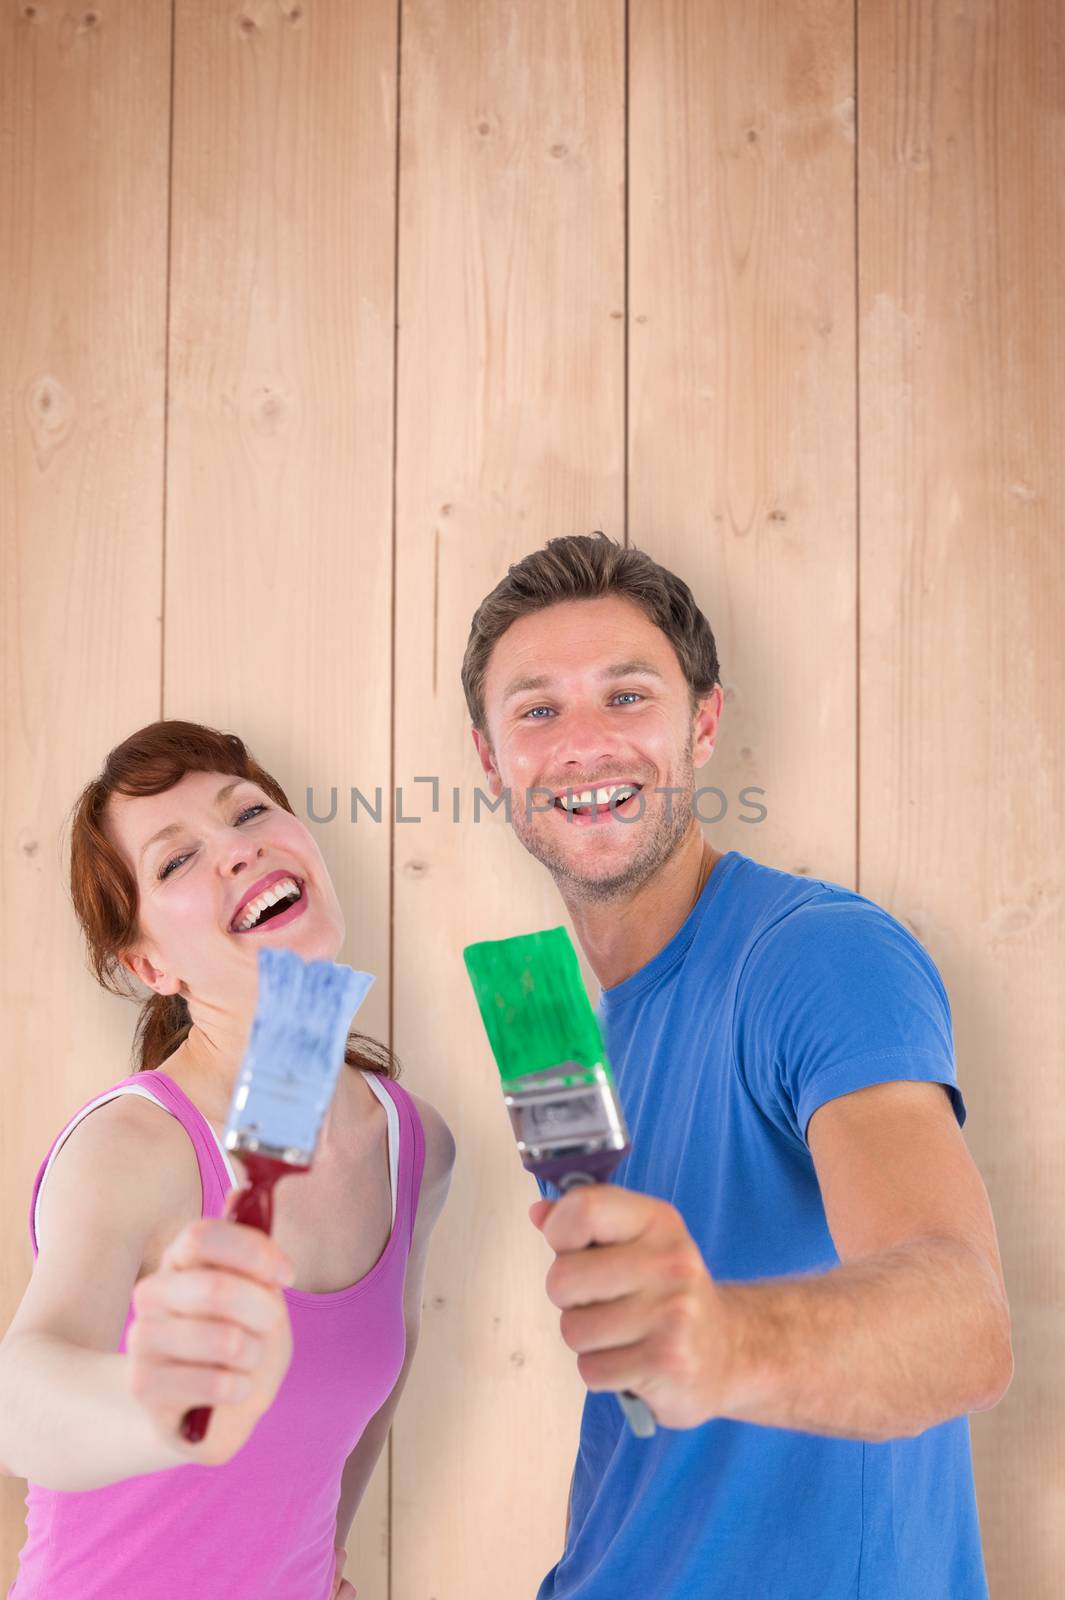 Couple both holding paint brushes against overhead of wooden planks